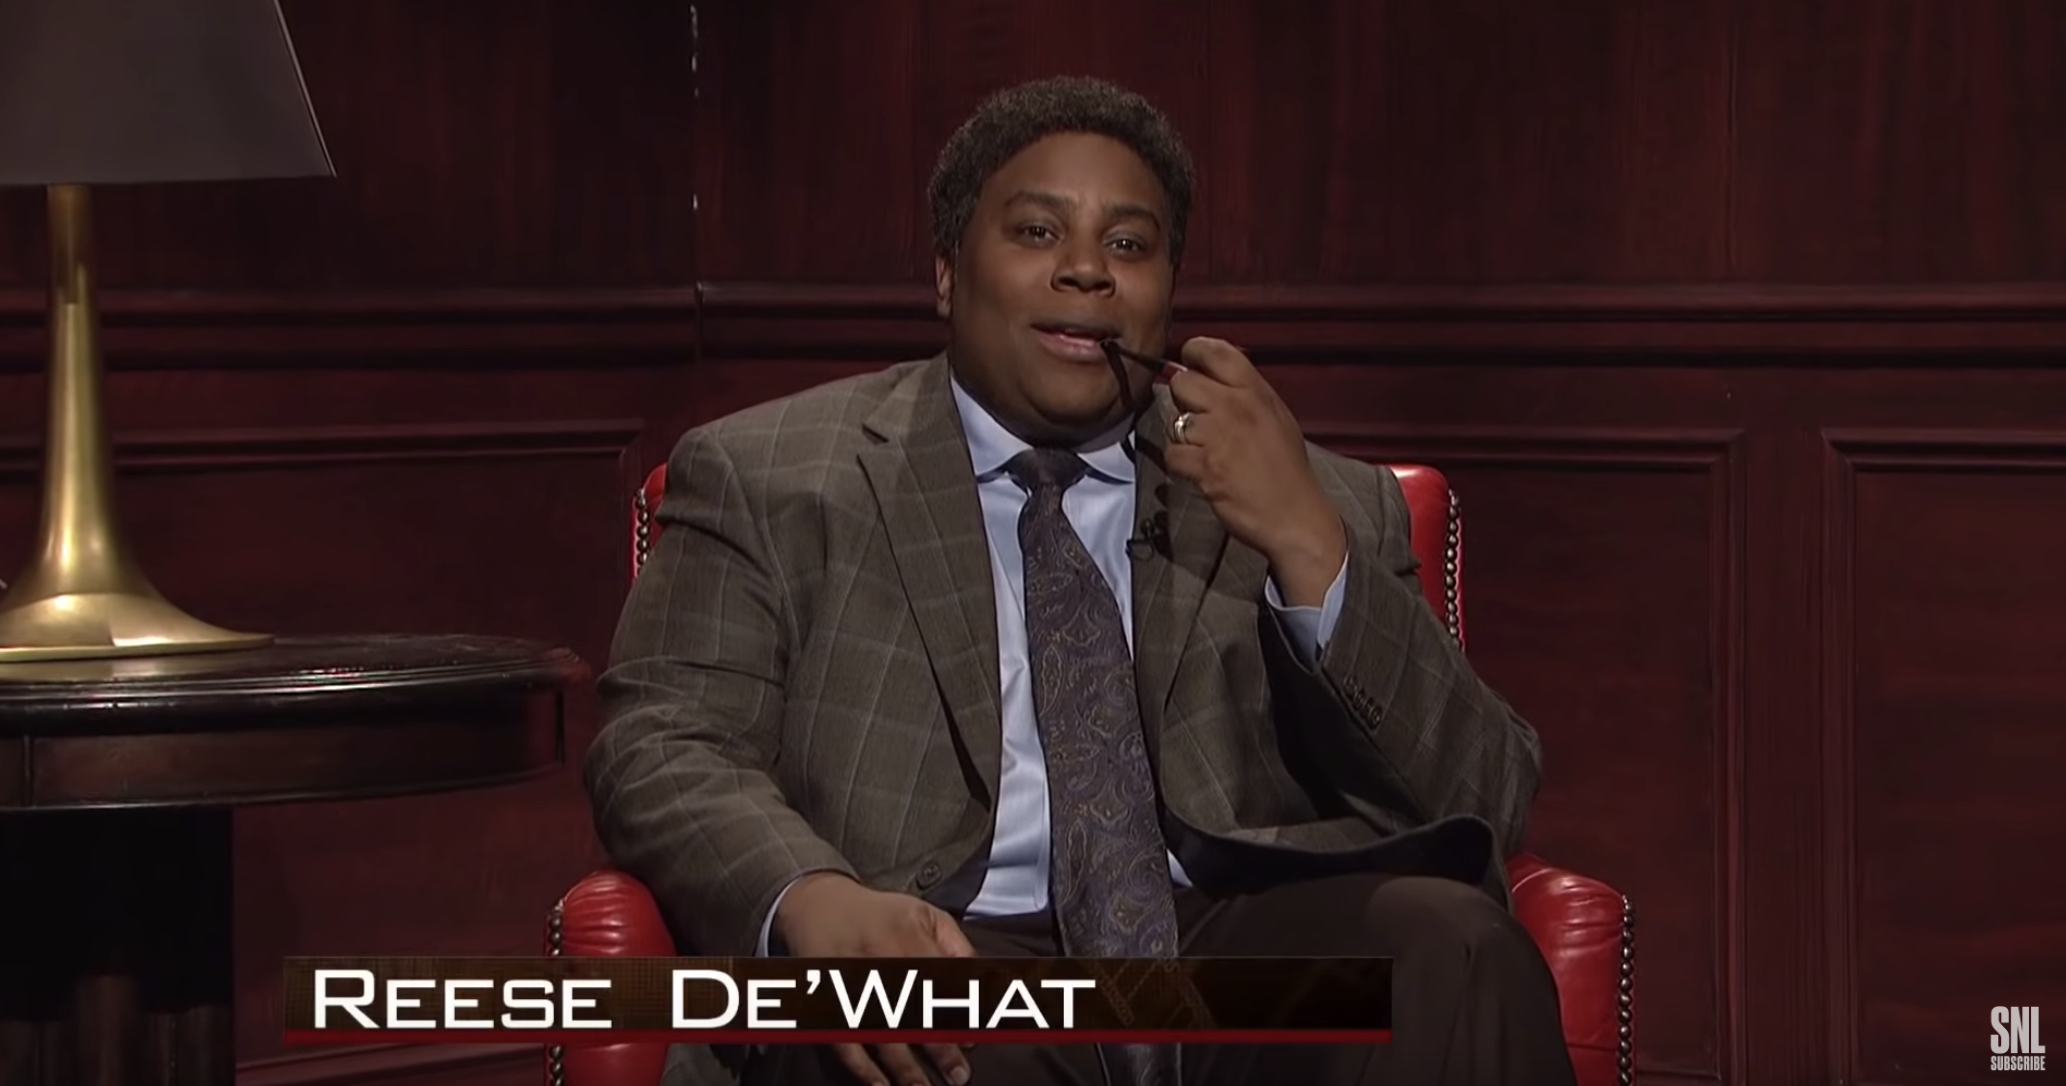 Kenan Thompson Surprised Gif : This gif of kenan thompson from the black je...